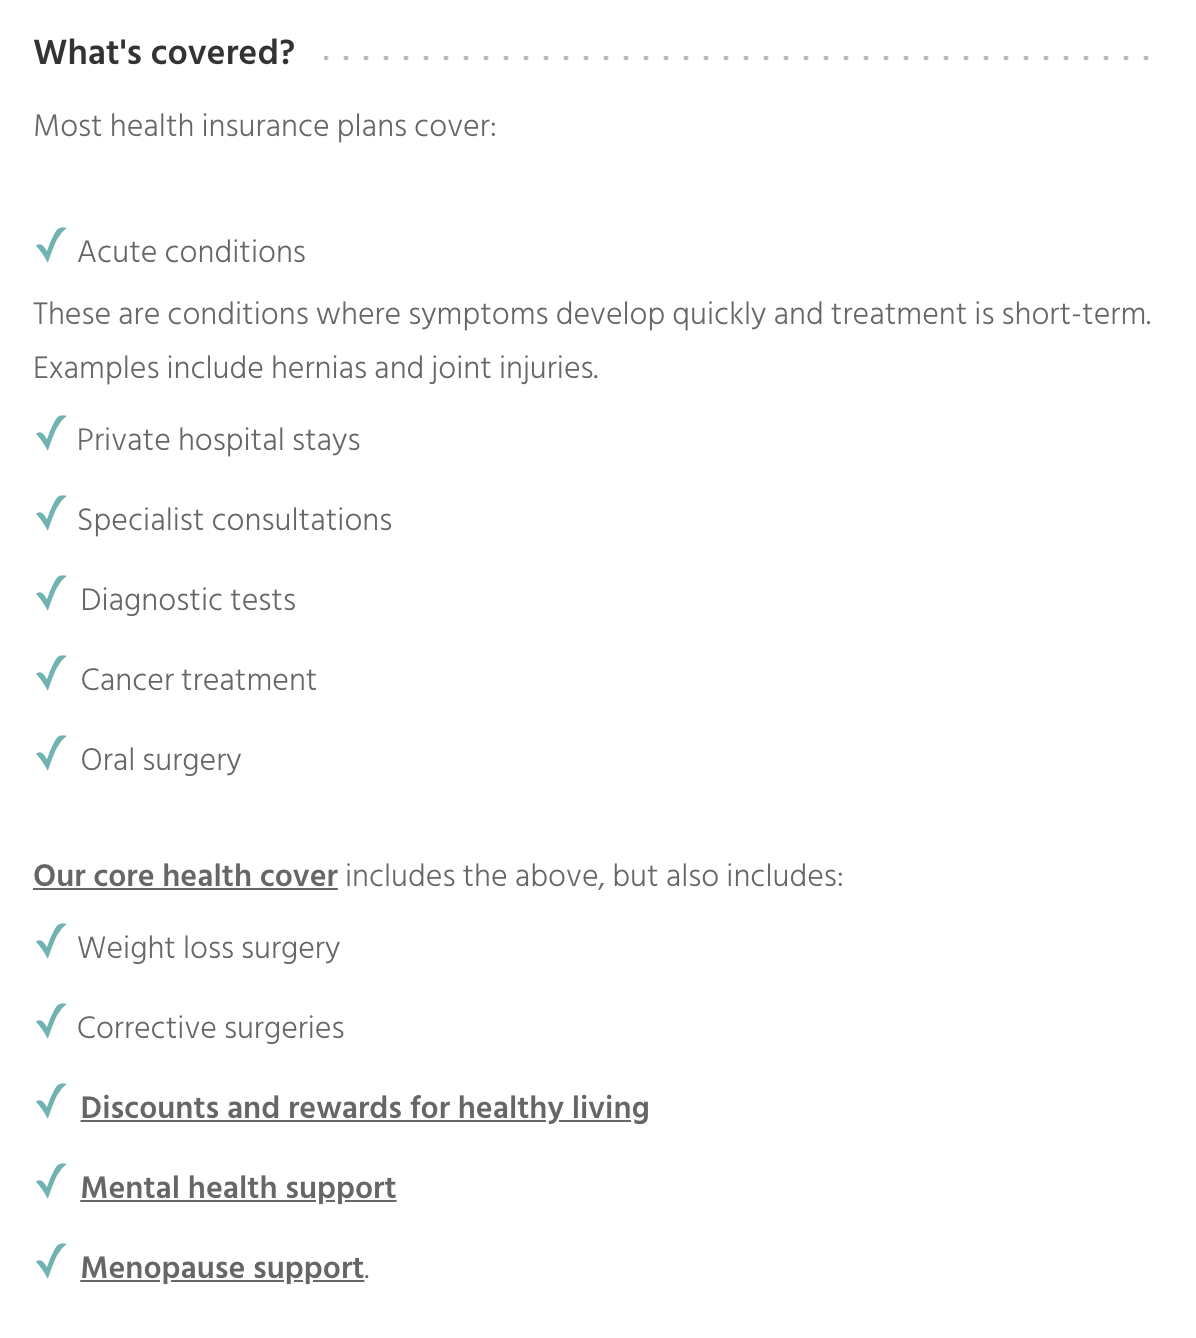 What's covered by most health insurance